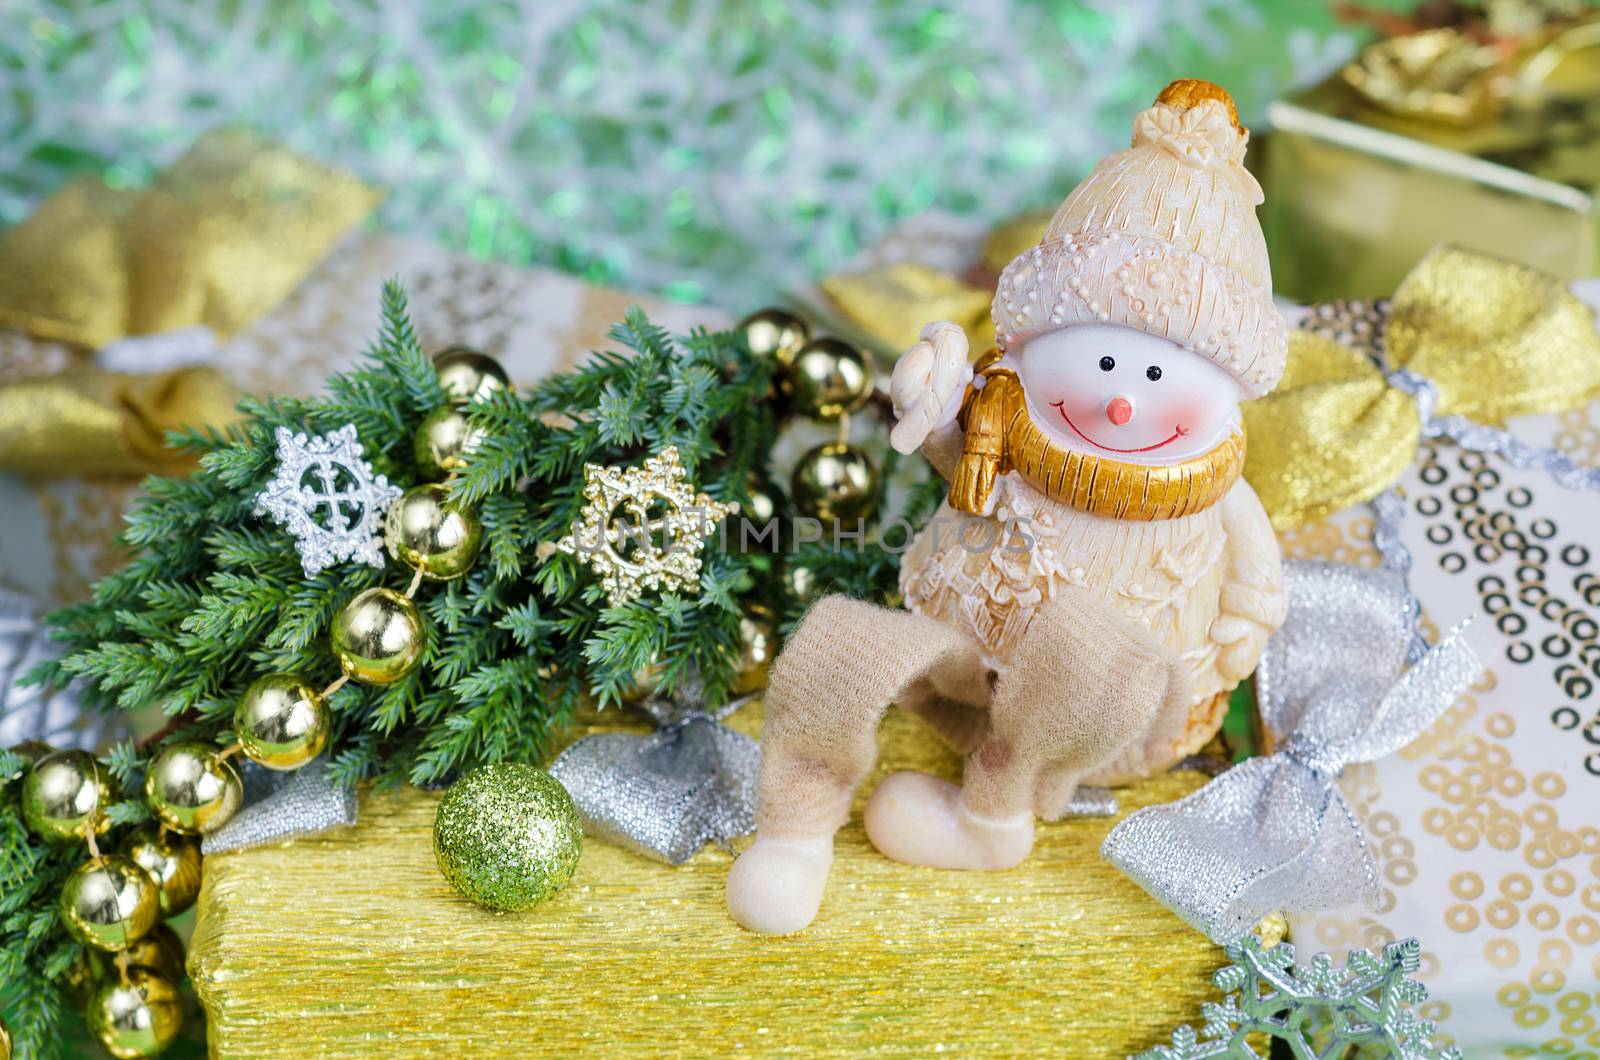 Christmas arrangement in green and gold tones. Cheerful Snowman, gifts and Christmas decorations. Selective focus.